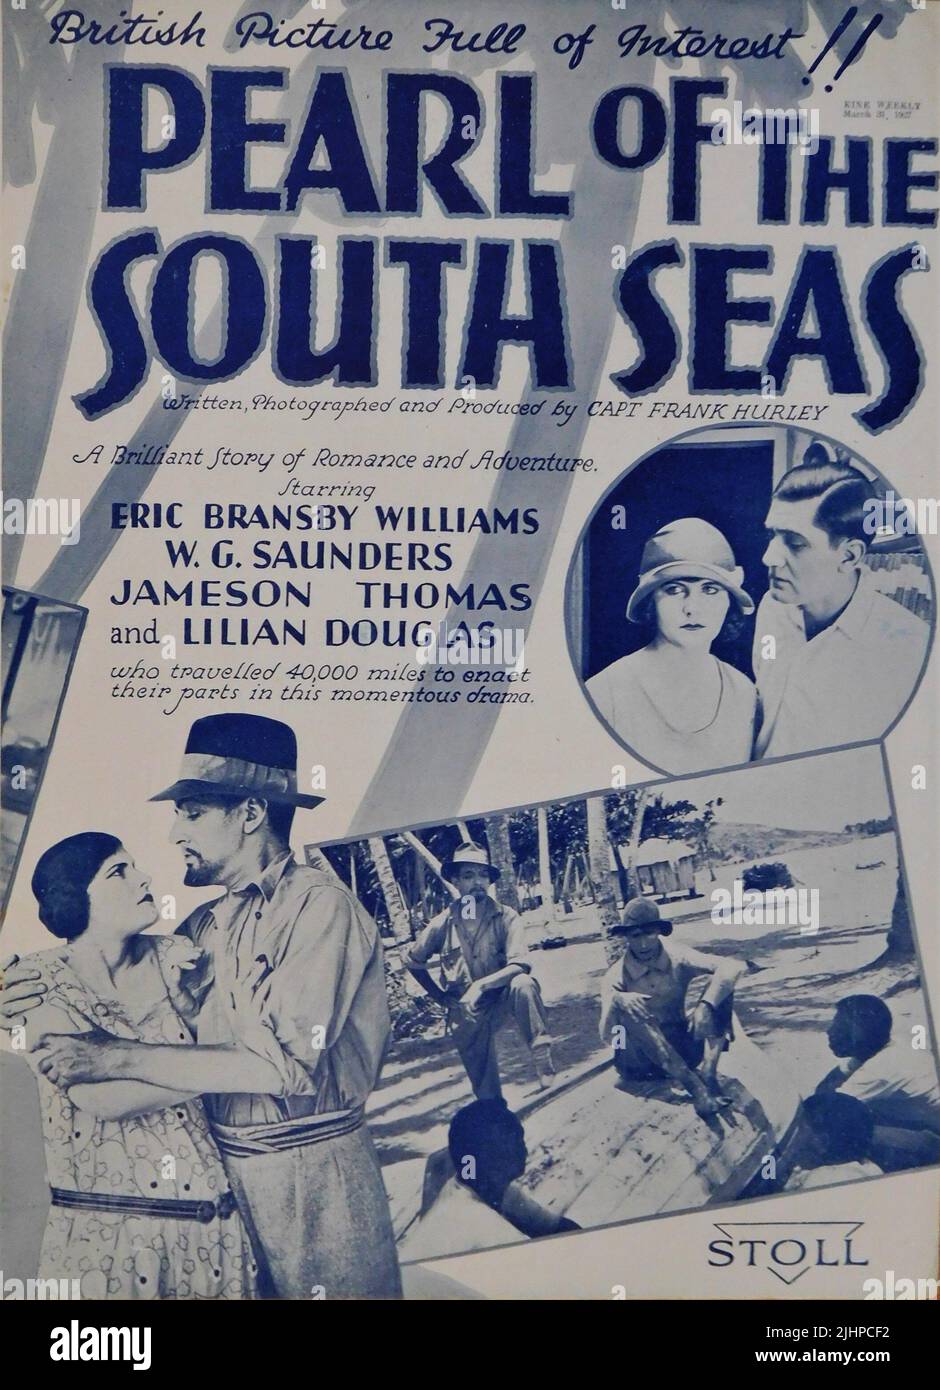 ERIC BRANSBY WILLIAMS W.G. SAUNDERS JAMESON THOMAS und LILIAN DOUGLAS in PEARL OF THE SOUTH SEAS (UK) / THE HOUND OF THE DEEP (US) 1926 Regisseur / Autor / Kameramann Captain FRANK HURLEY Regieassistent W.G. Saunders Co-Kameramann Walter Sully Hurley Productions / Stoll Picture Productions Stockfoto